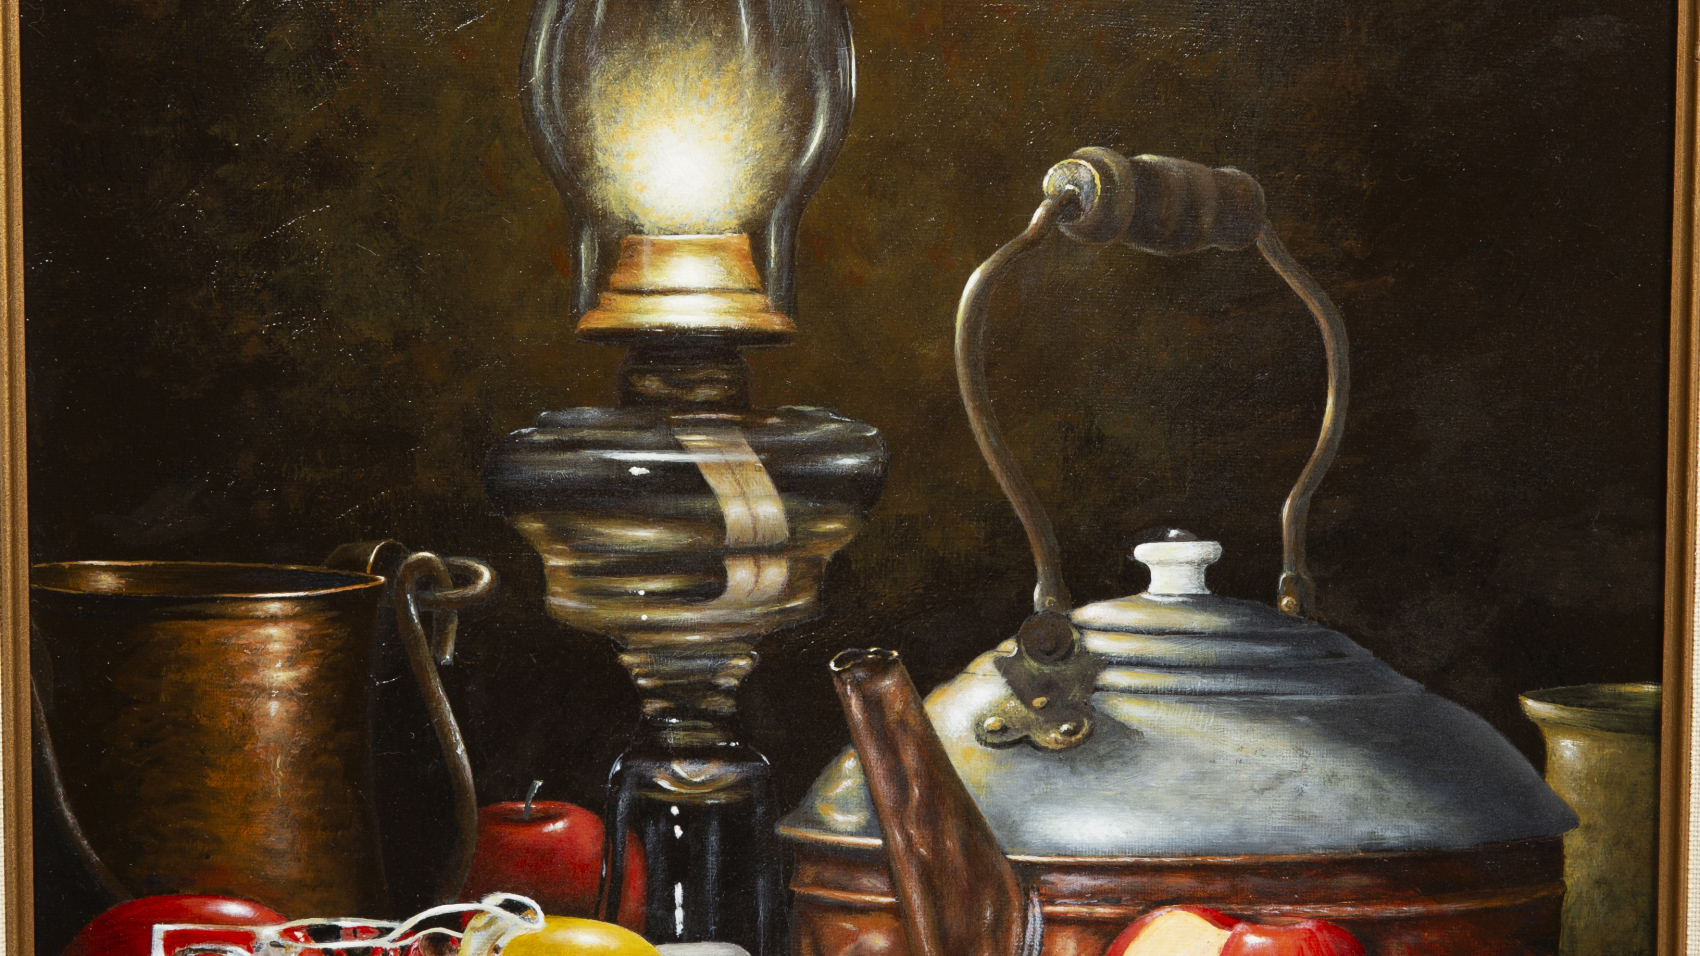 Painting - Lamp and Tea Kettle - painting of vintage oil lamp burning with bright light with an antique tea kettle sitting next to red and green apples on covered table